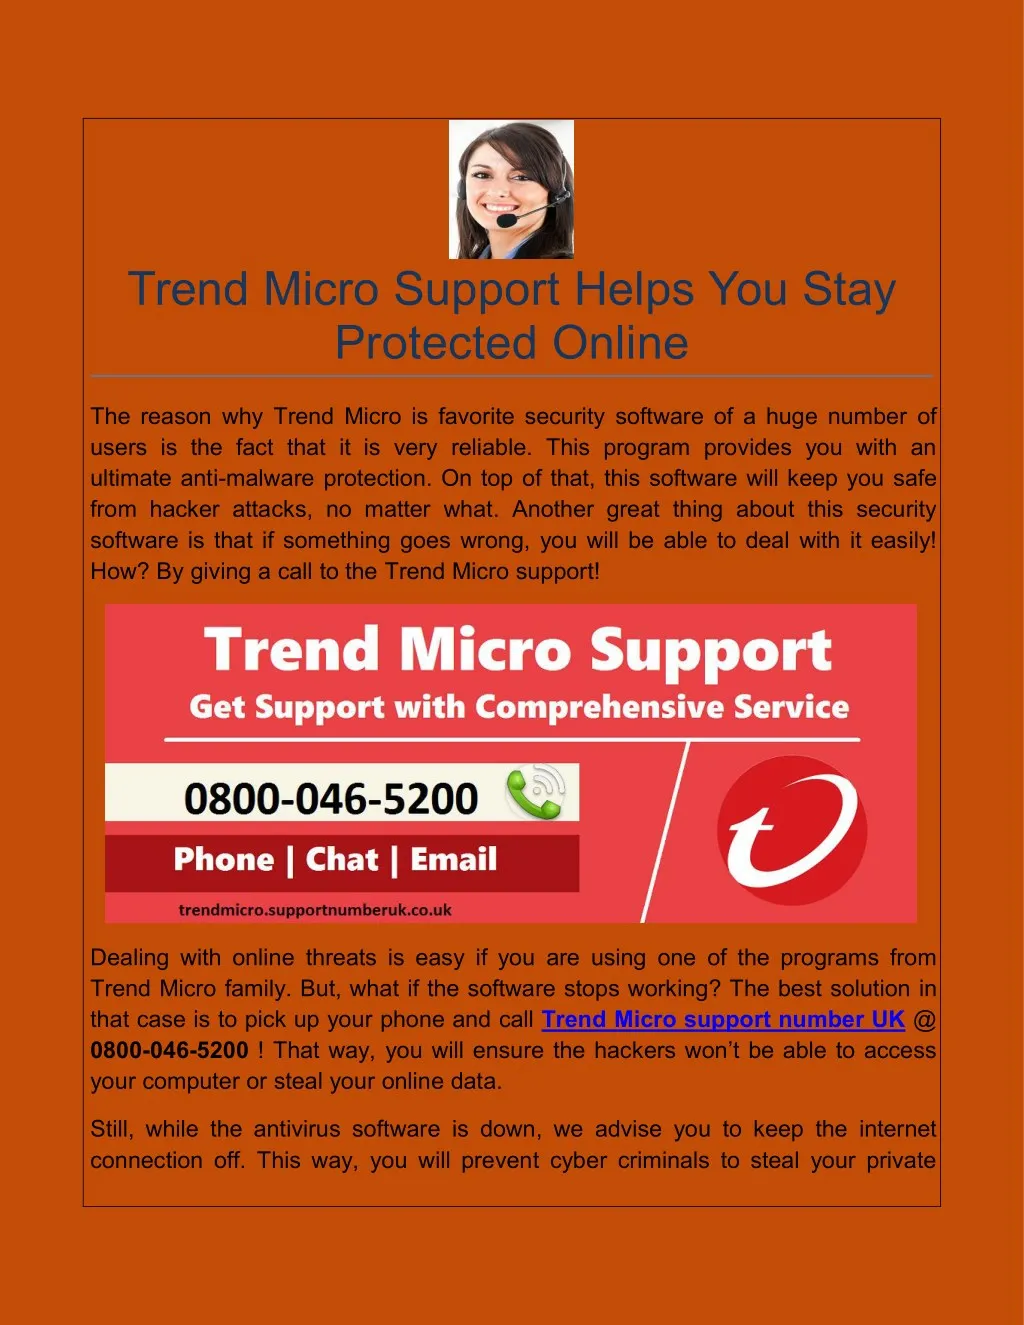 trend micro support helps you stay protected